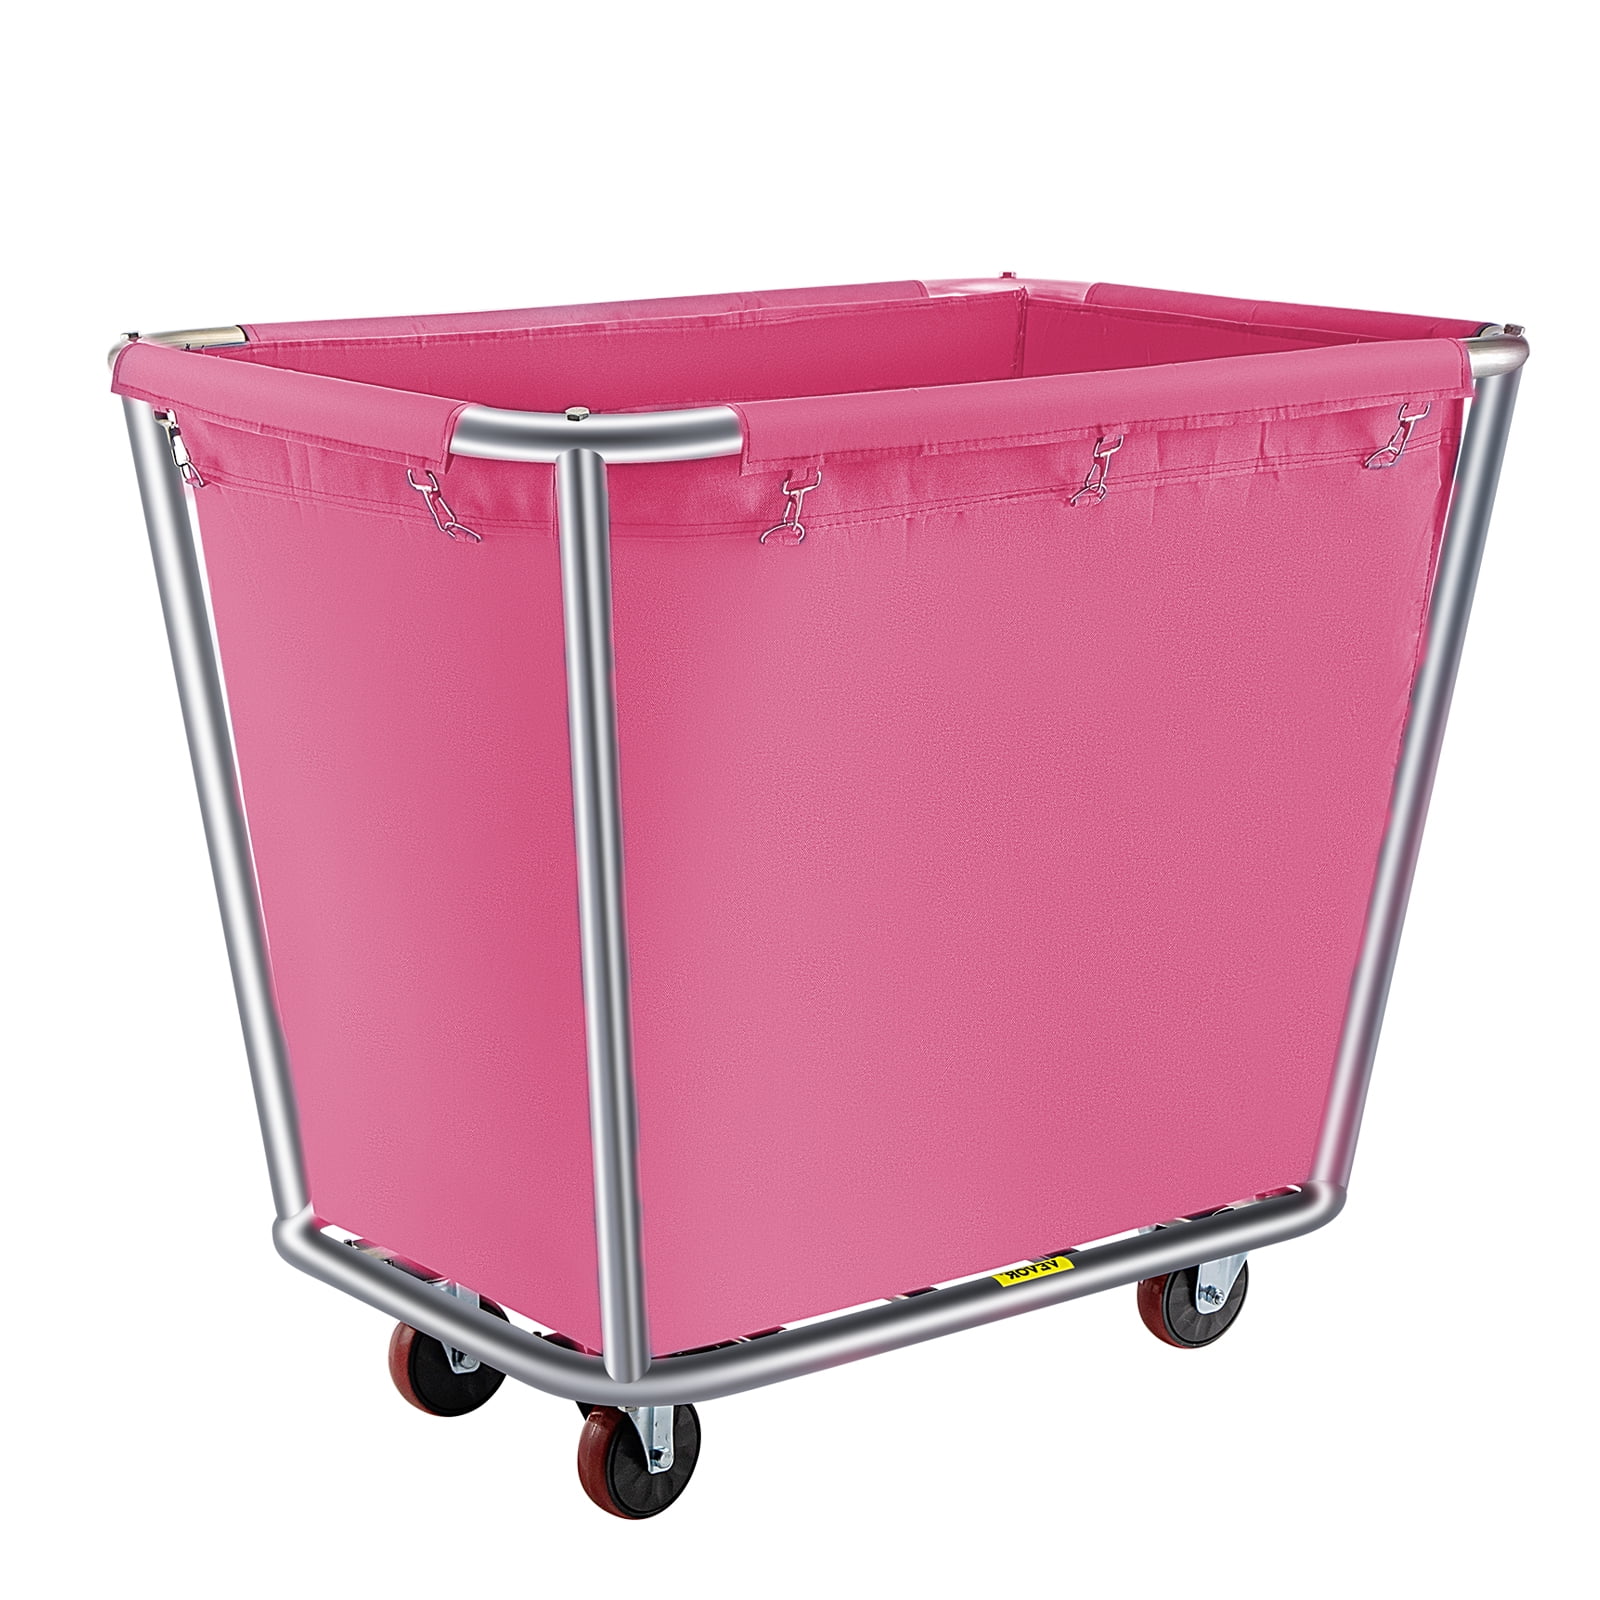 Large Commercial Postal Laundry Trolley for Home Warehouse Hotel with Casters 